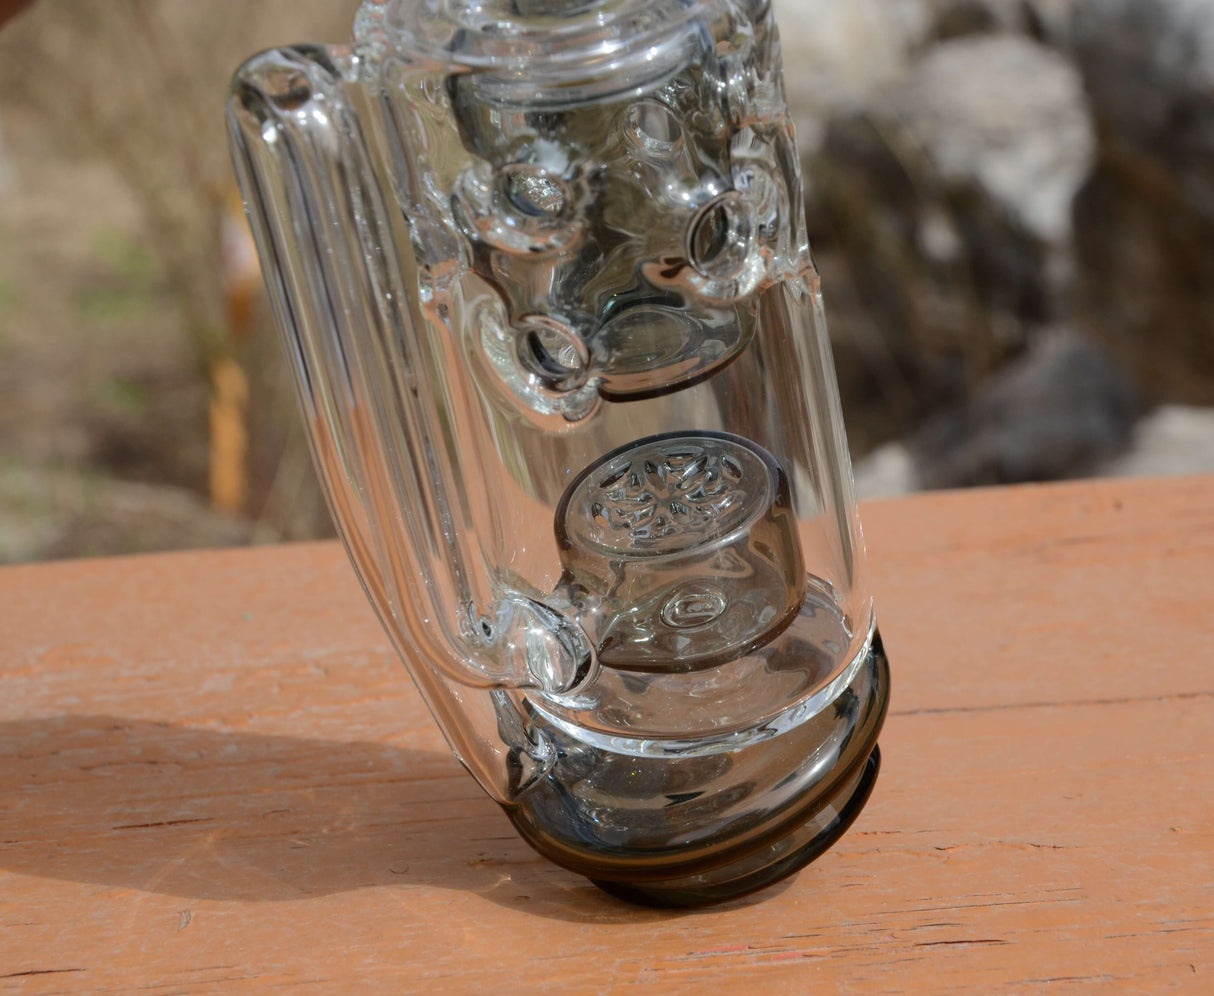 Calibear Straight Fab Puffco Attachment in clear glass, angled side view on wooden surface